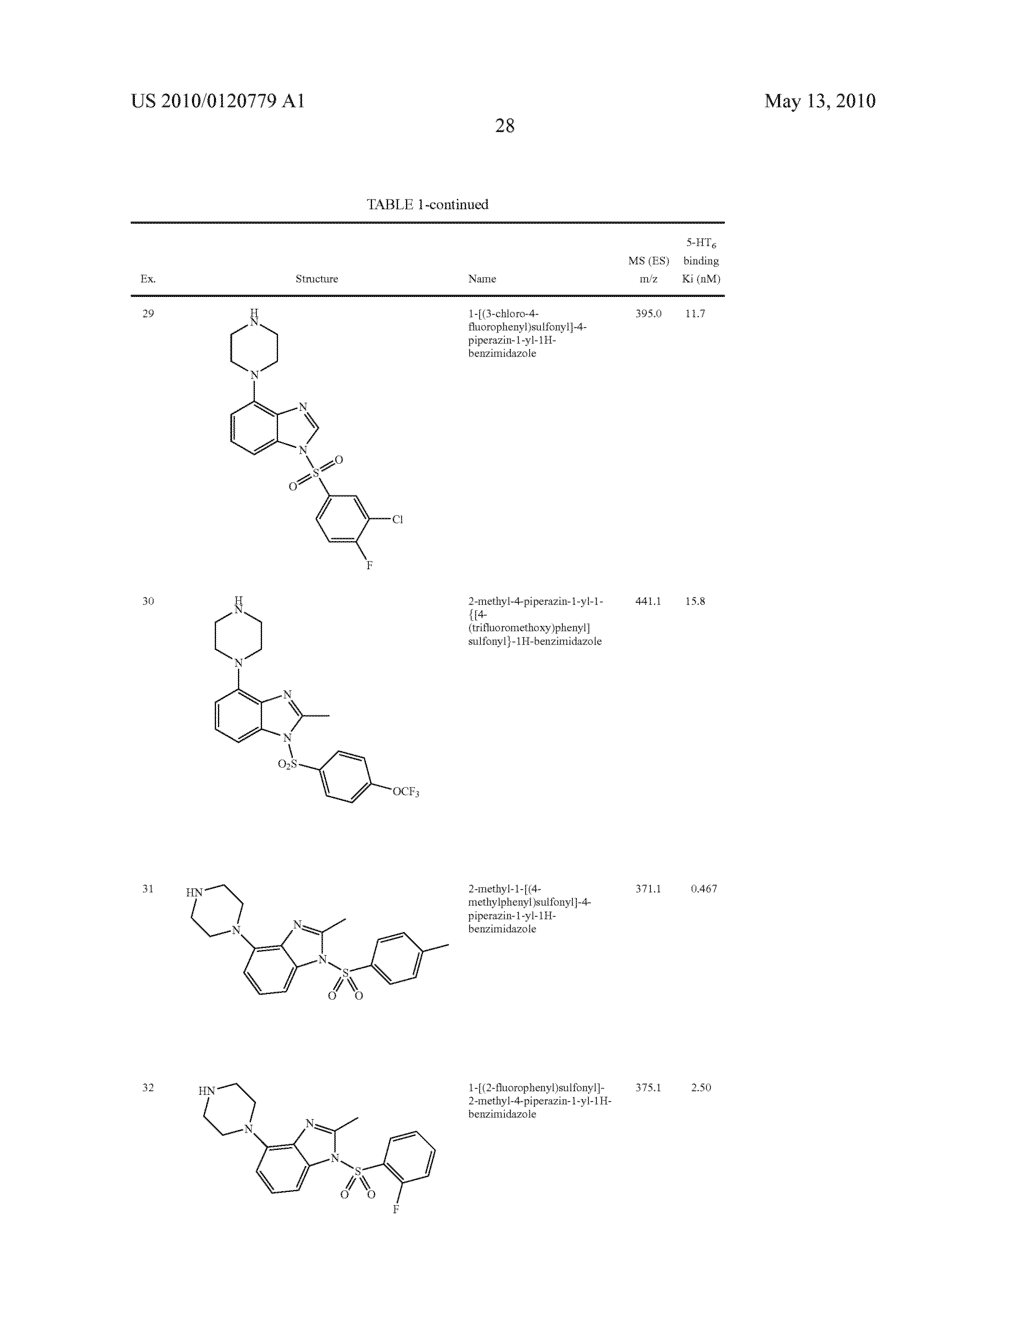 1-(ARYLSULFONYL)-4-(PIPERAZIN-1-YL)-1H-BENZIMIDAZOLES AS 5-HYDROXYTRYPTAMINE-6 LIGANDS - diagram, schematic, and image 29